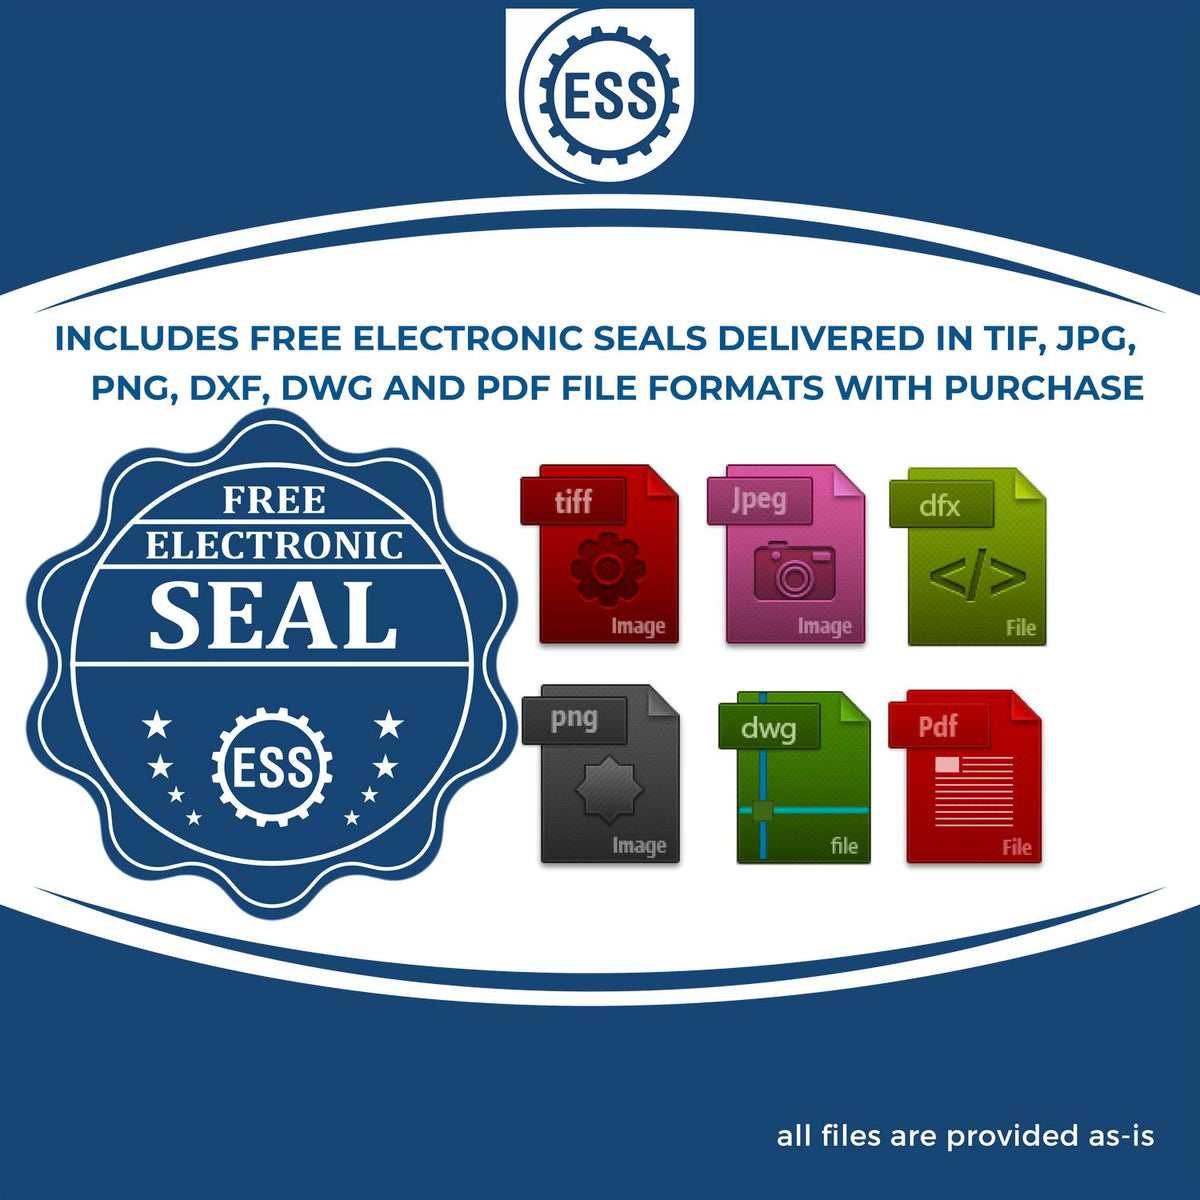 An infographic for the free electronic seal for the Soft Kentucky Professional Engineer Seal illustrating the different file type icons such as DXF, DWG, TIF, JPG and PNG.